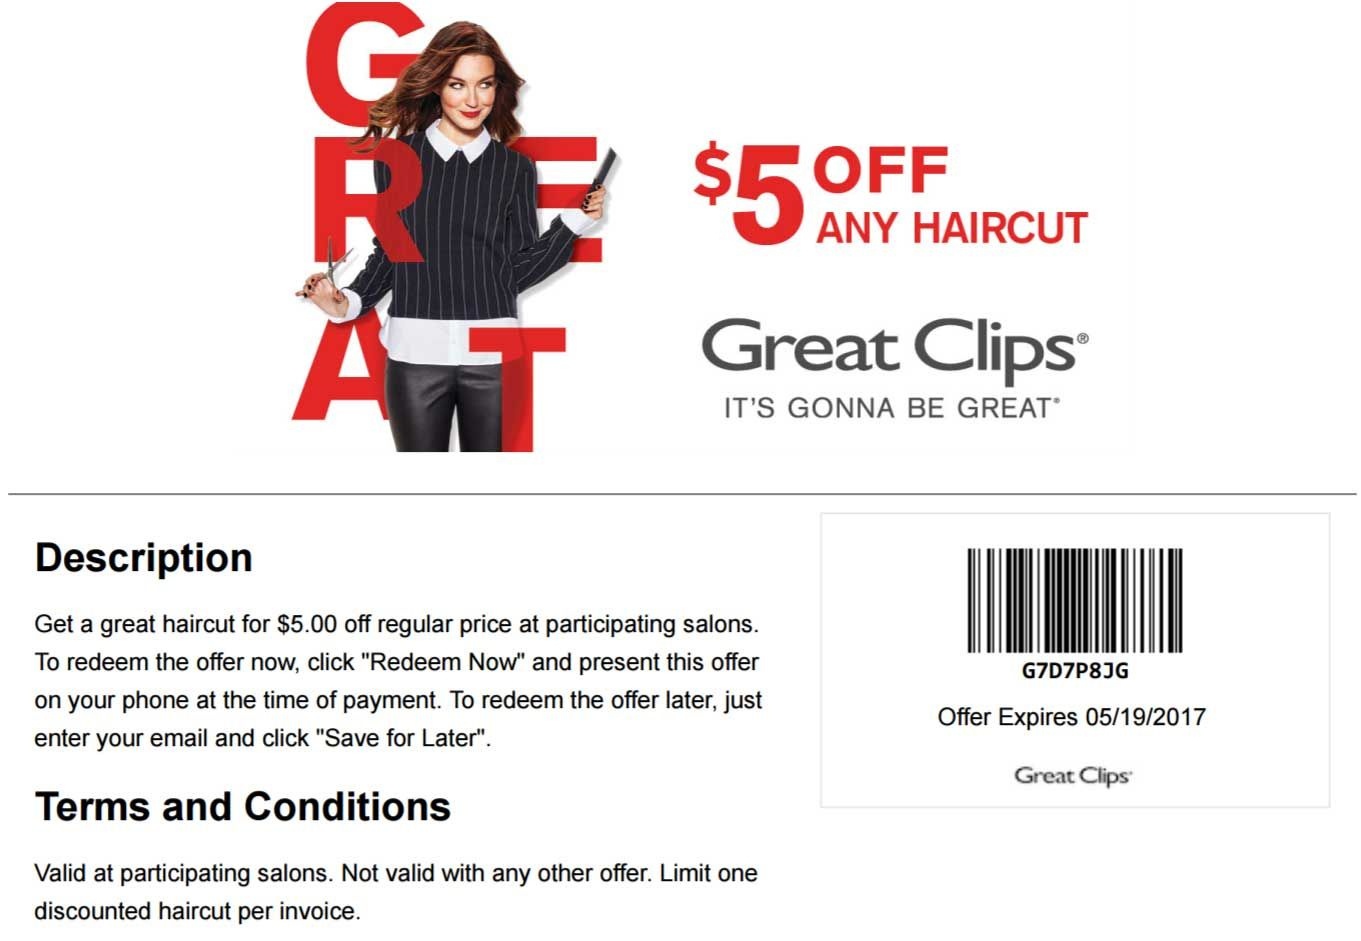 Printable Haircut Coupons / Great Clips Coupons 5 OFF 2021